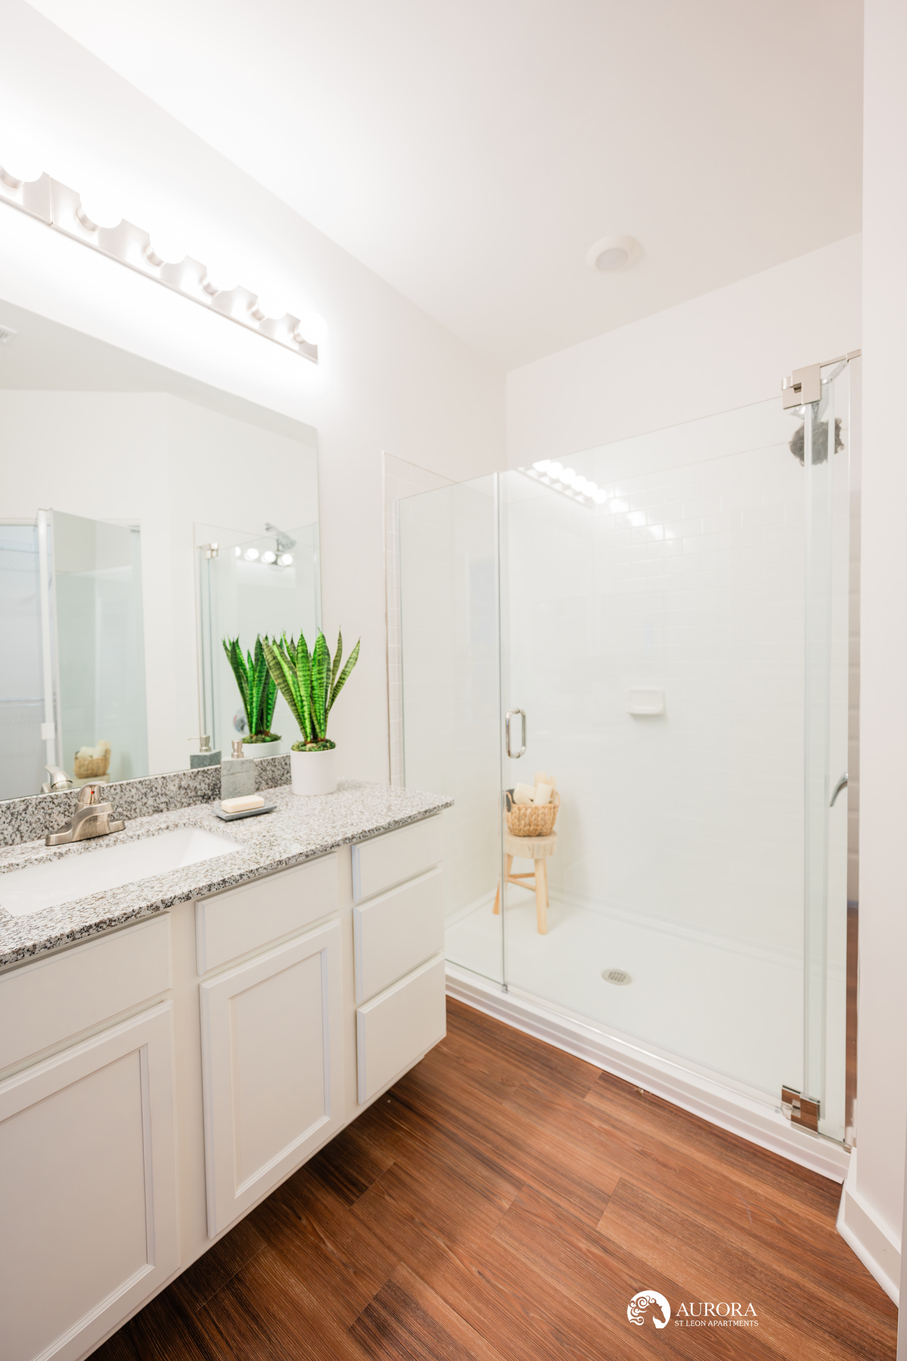 A white bathroom with a glass shower stall in a 42 unit apartment property managed by professionals.